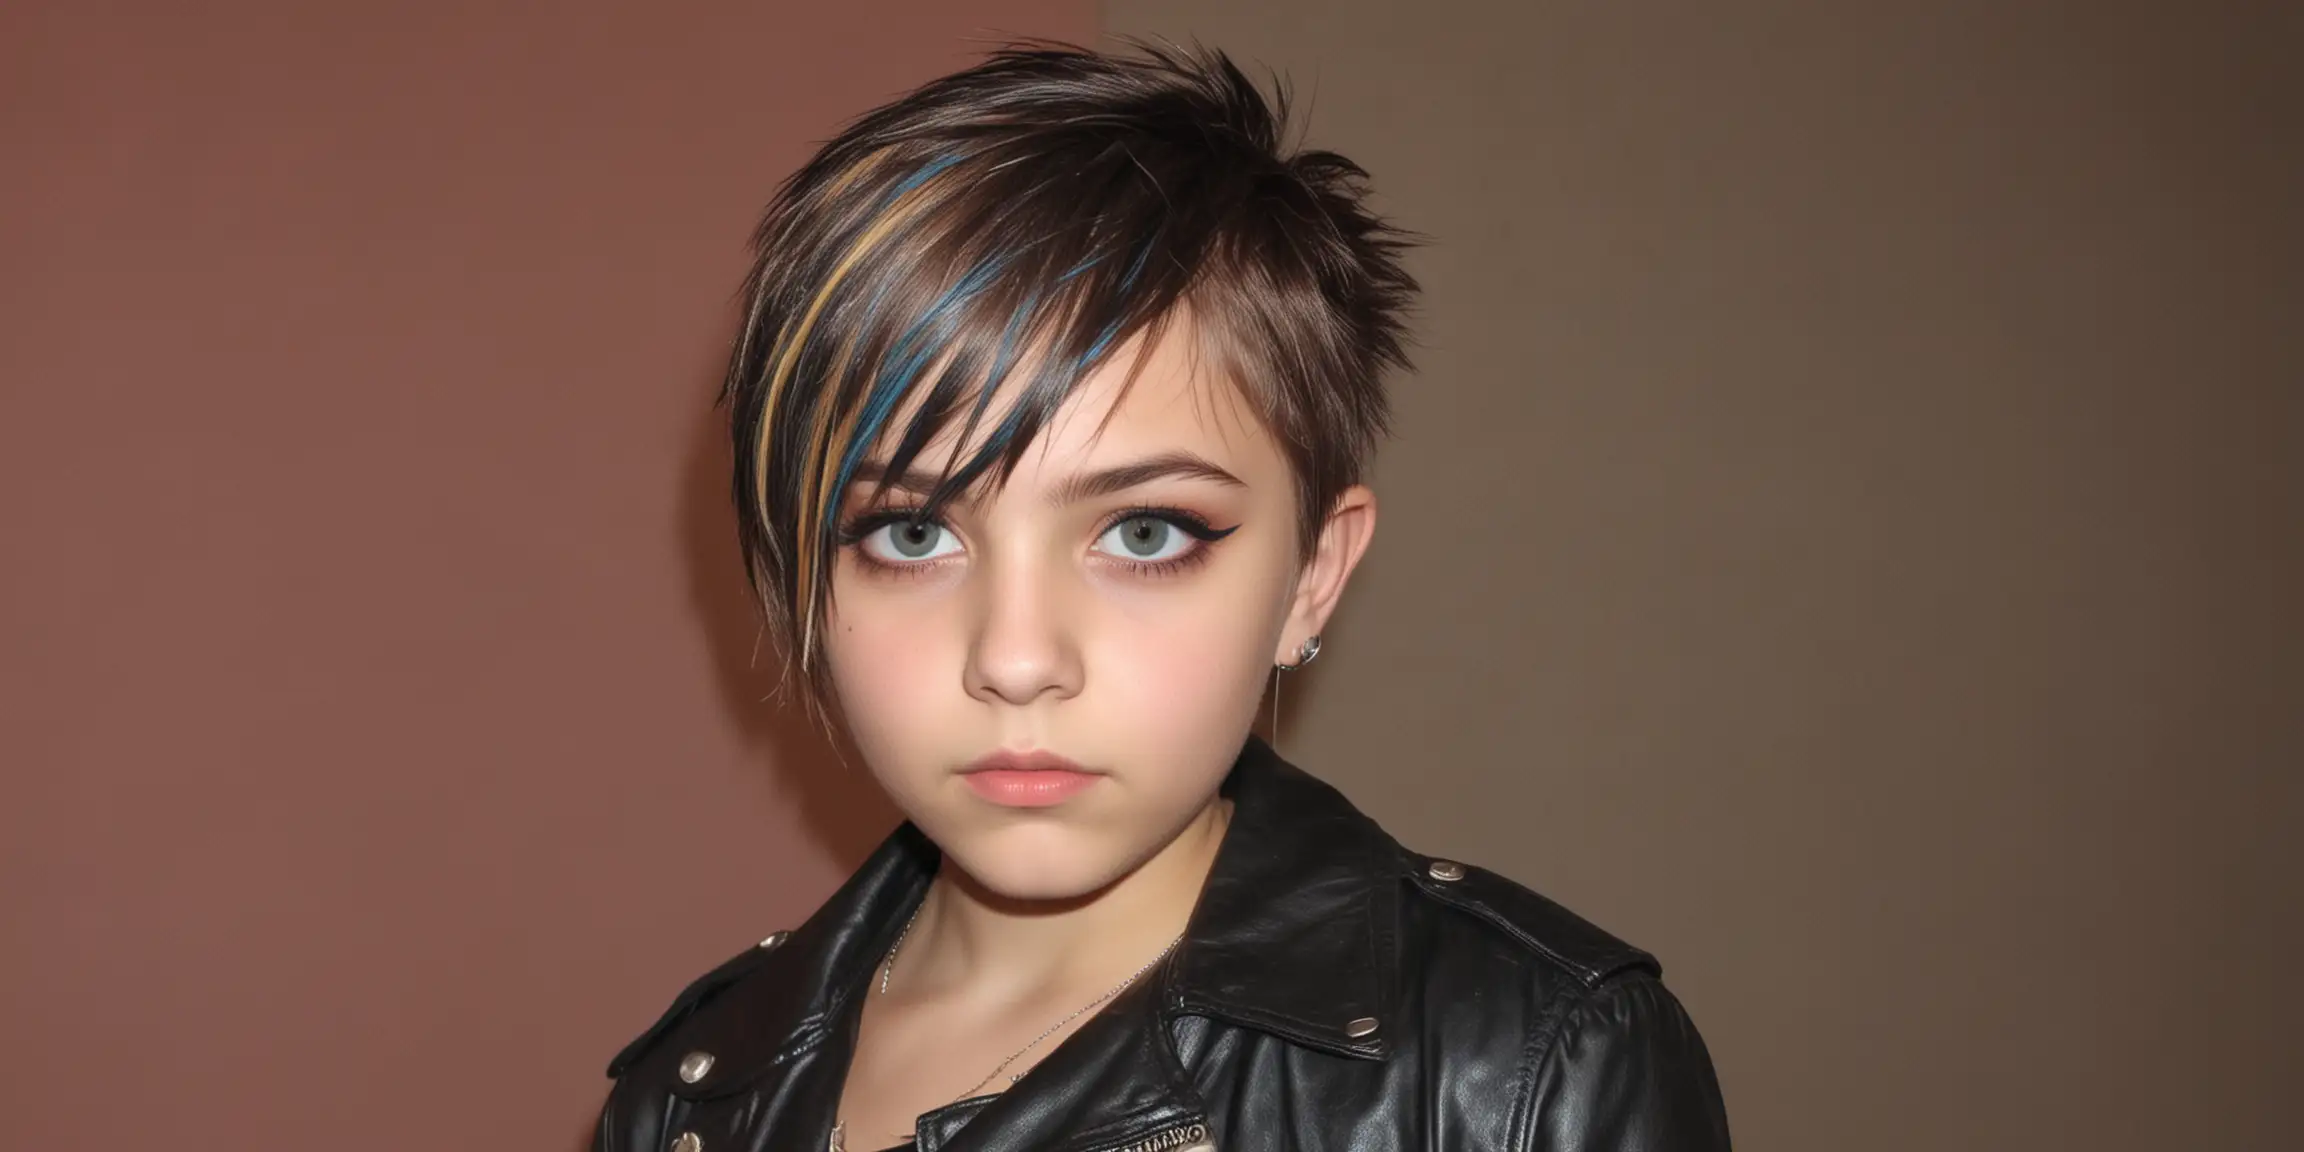 Edgy Preteen Girls with Boys Haircuts and Colored Hair in Leather Jackets